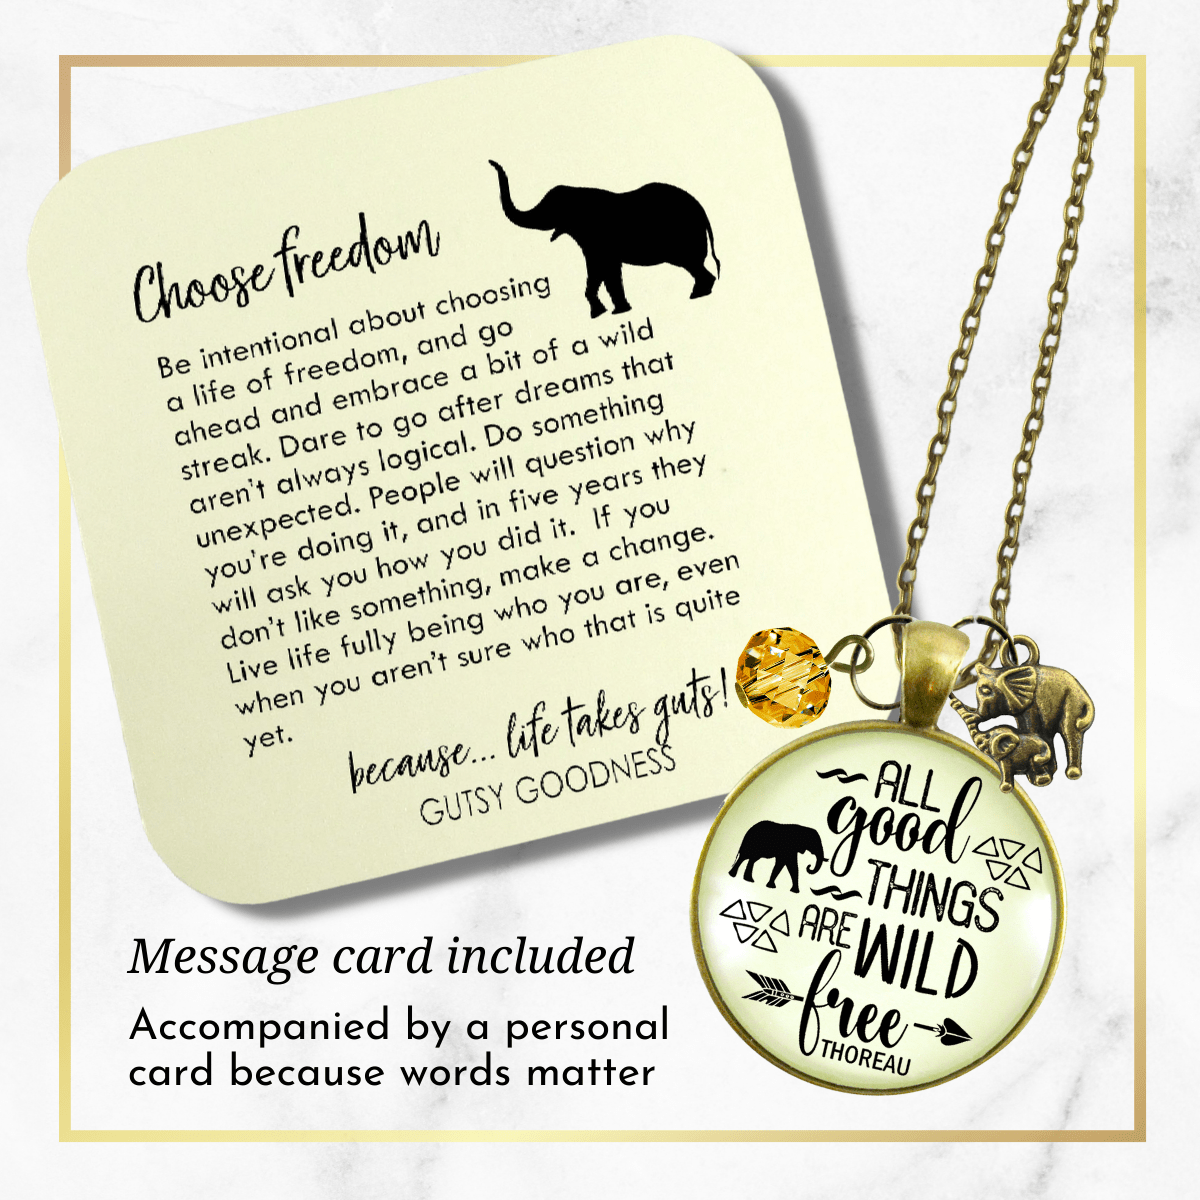 Gutsy Goodness Wild and Free Necklace Good Things Thoreau Quote Elephant Jewelry - Gutsy Goodness Handmade Jewelry;Wild And Free Necklace Good Things Thoreau Quote Elephant Jewelry - Gutsy Goodness Handmade Jewelry Gifts